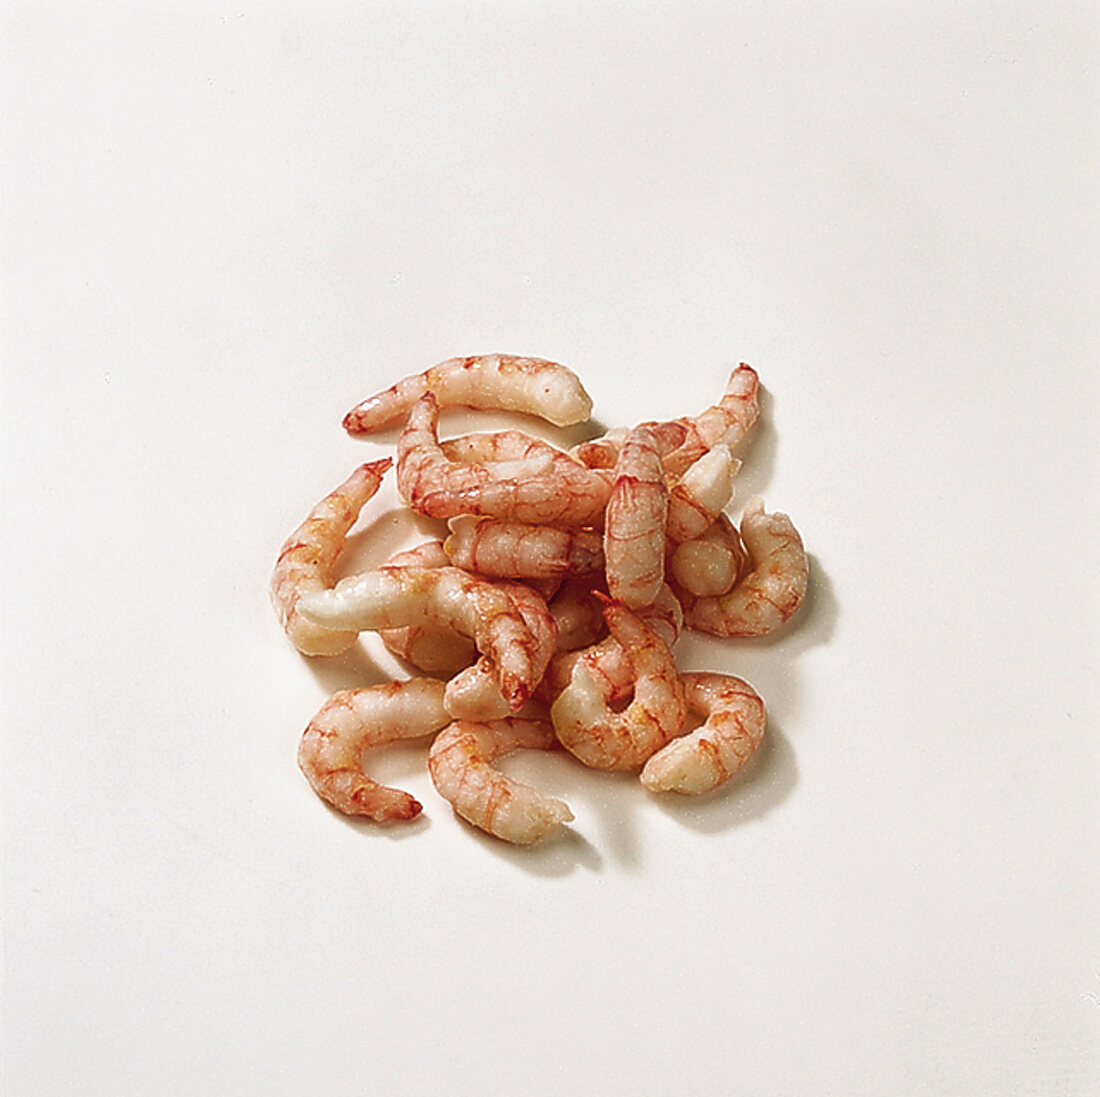 Peeled and cooked shrimps on white background